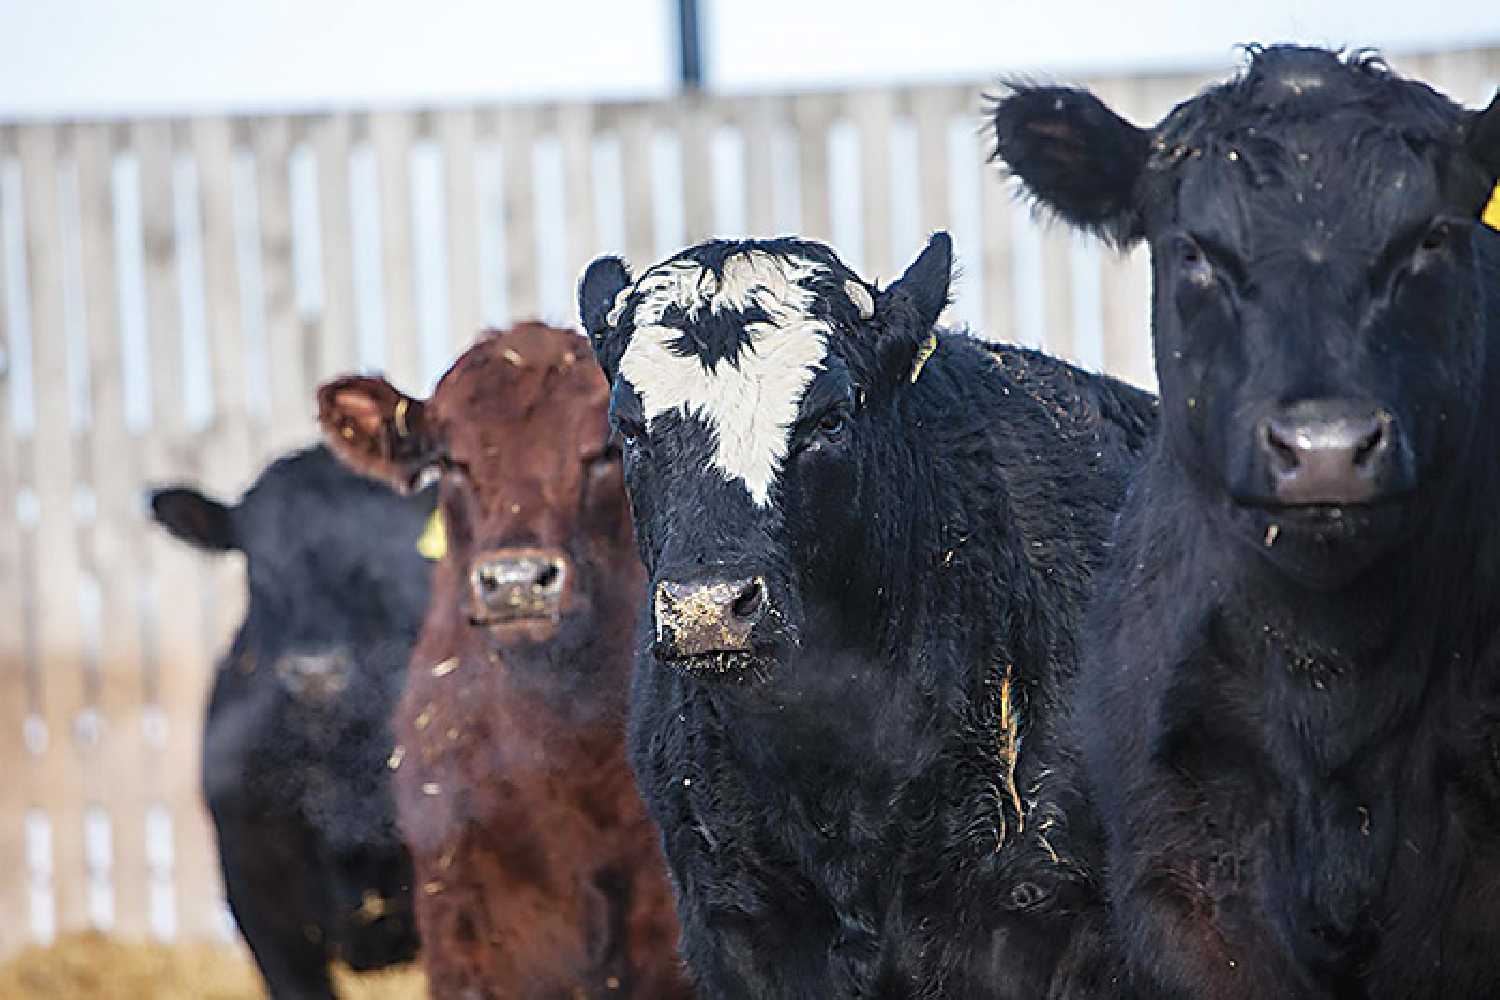 Farmers in Southeast Saskatchewan are happy to see the provincial government adjust the eligibility requirements for PDAP, now allowing farmers who make more than $2 million in gross revenues, to apply for the program.